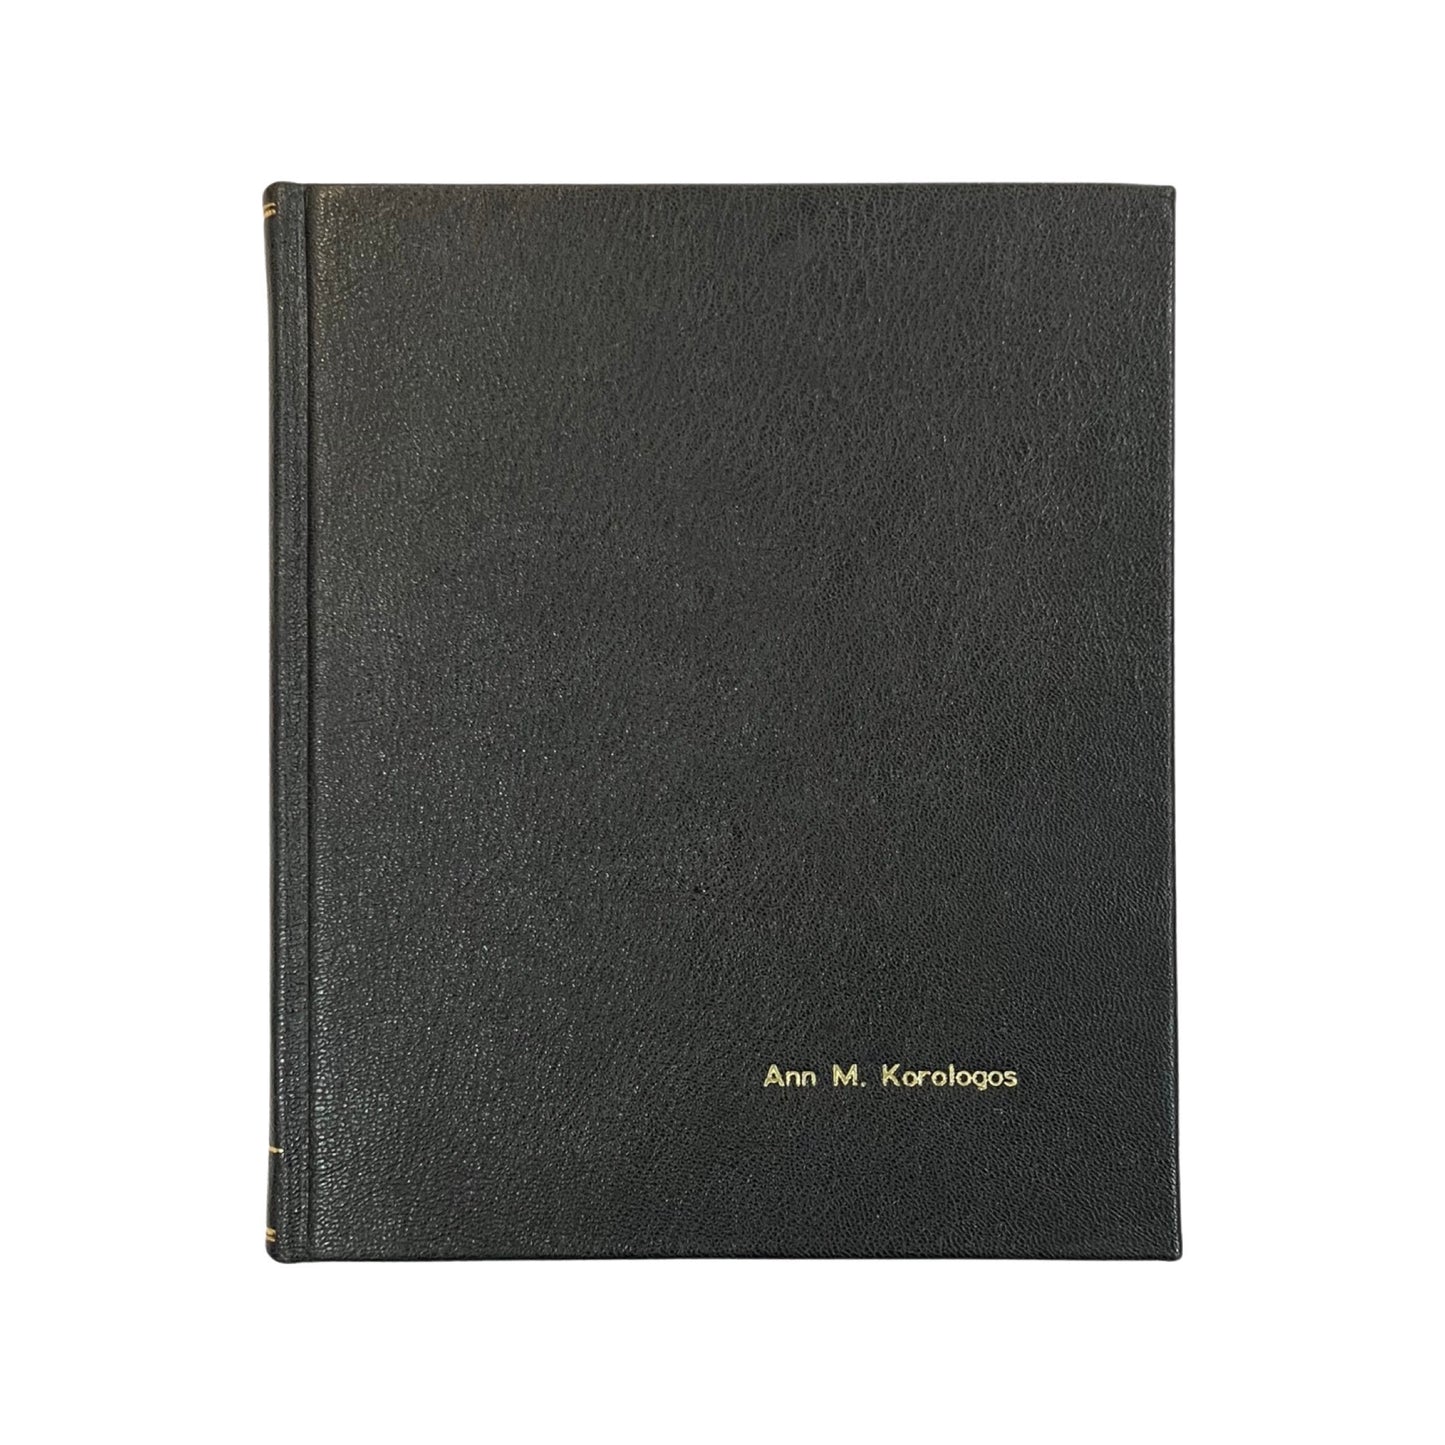 Joseph Gawler's Sons | Bespoke Funeral Book | Personalized in Gold